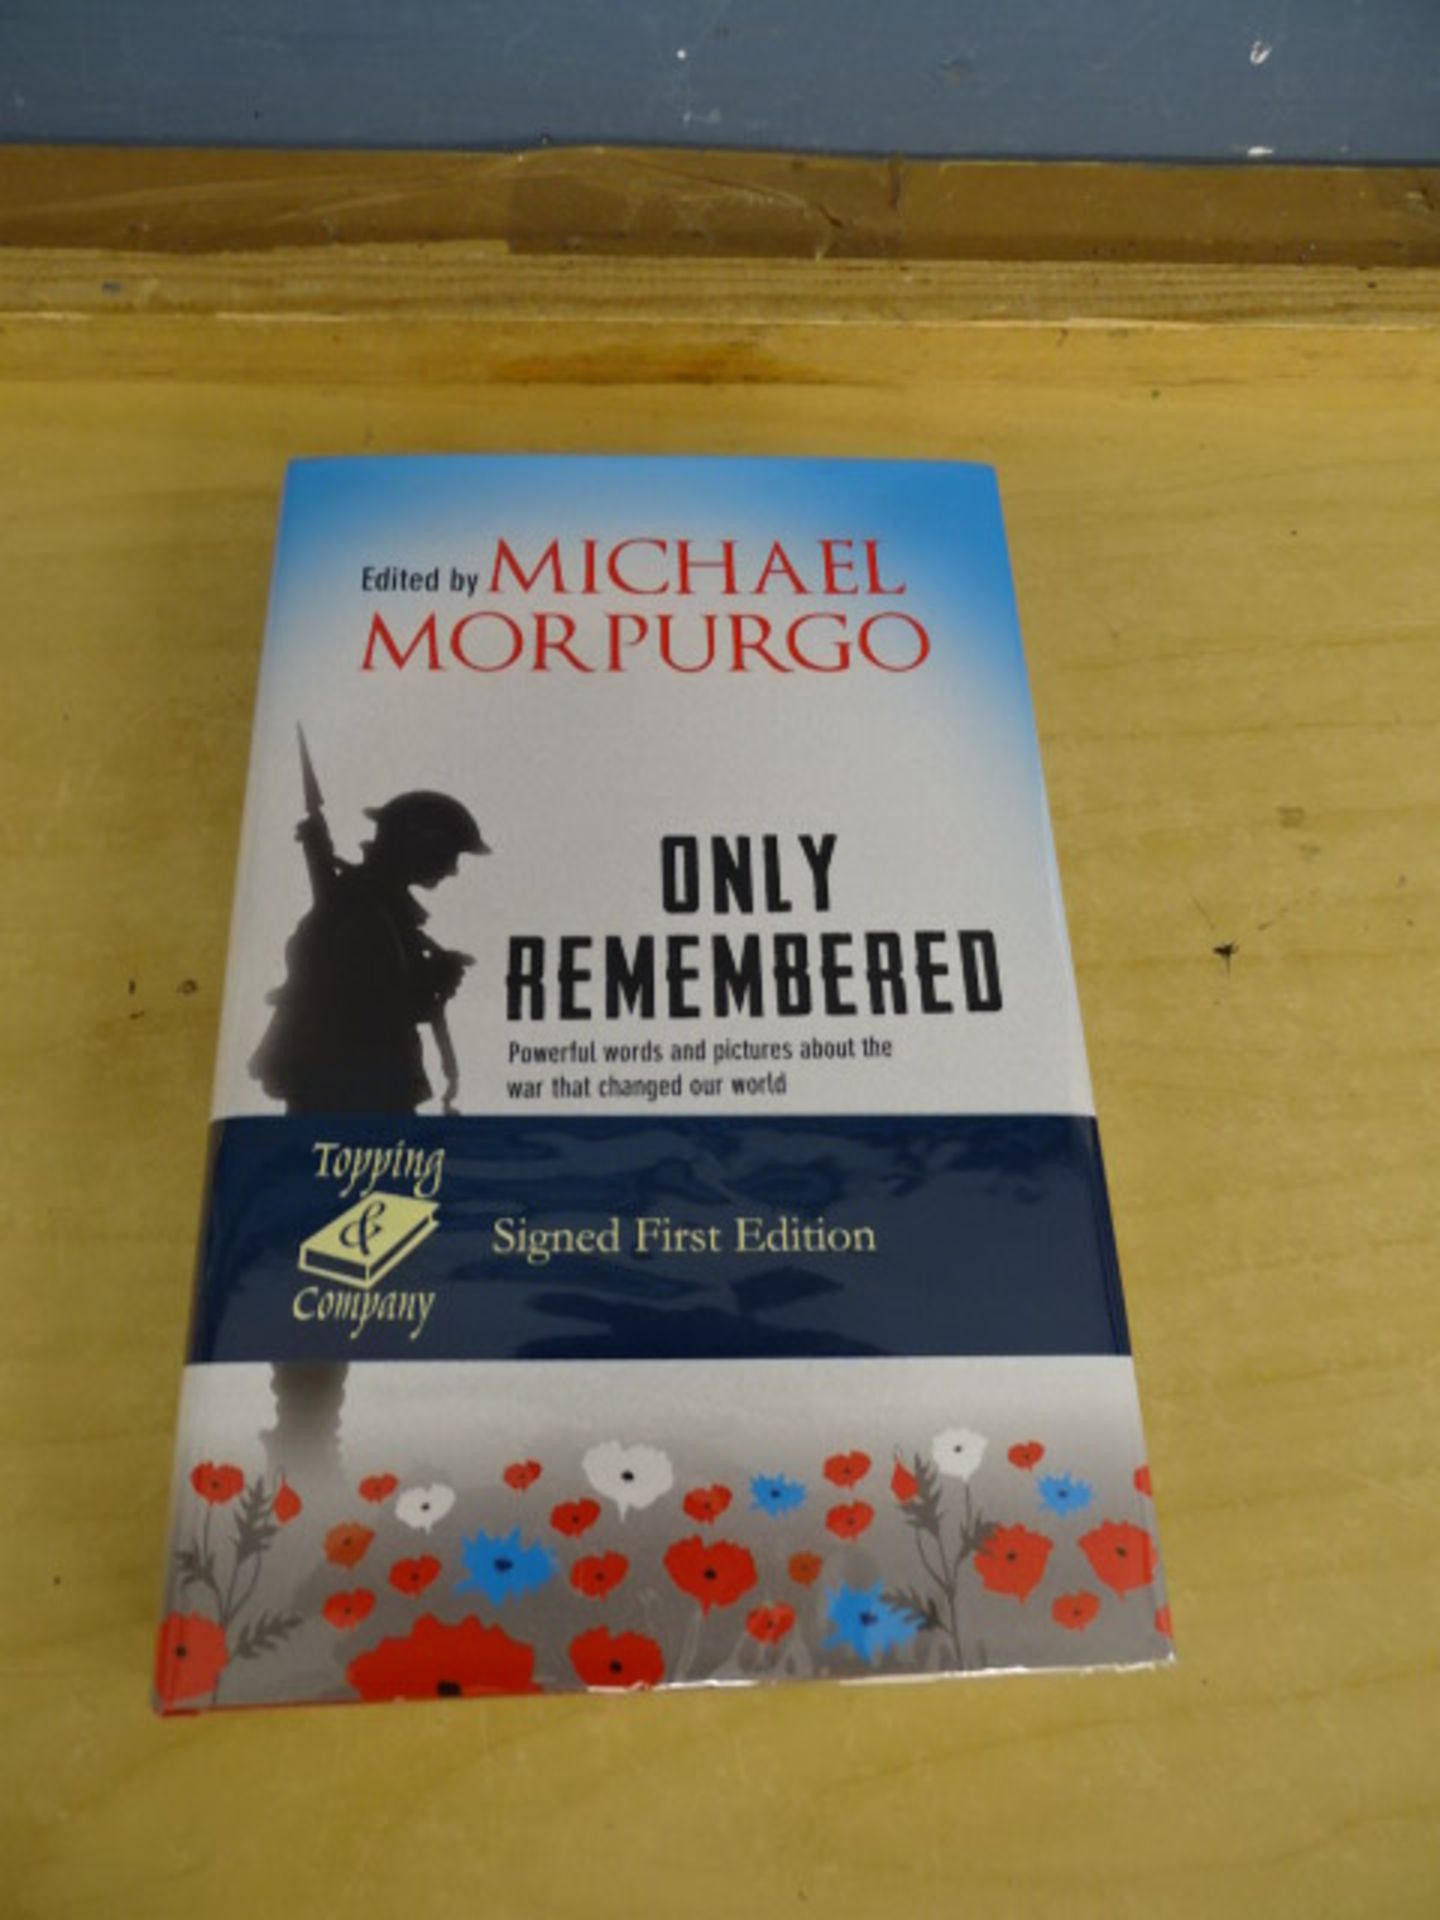 'Only Remembered' by Michael Morpurgo signed first edition hardback book with dust jacket